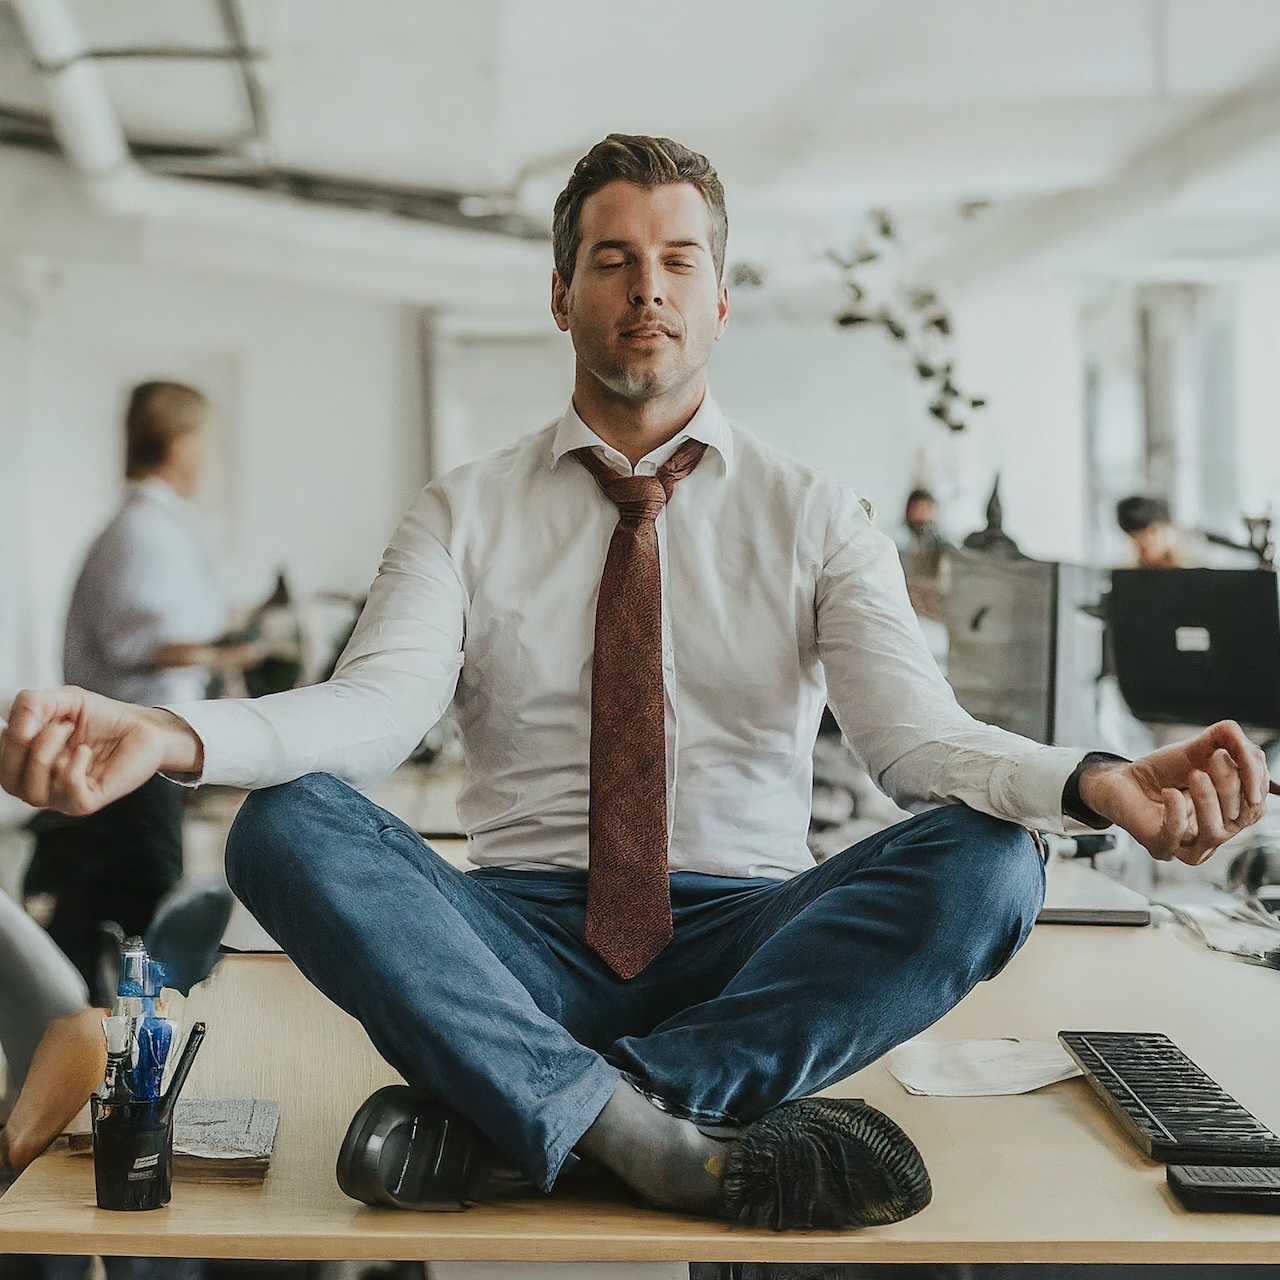 With the arrival of International Yoga Day, we look at the specific benefits of yoga for men looking to increase flexibility and mental clarity. 